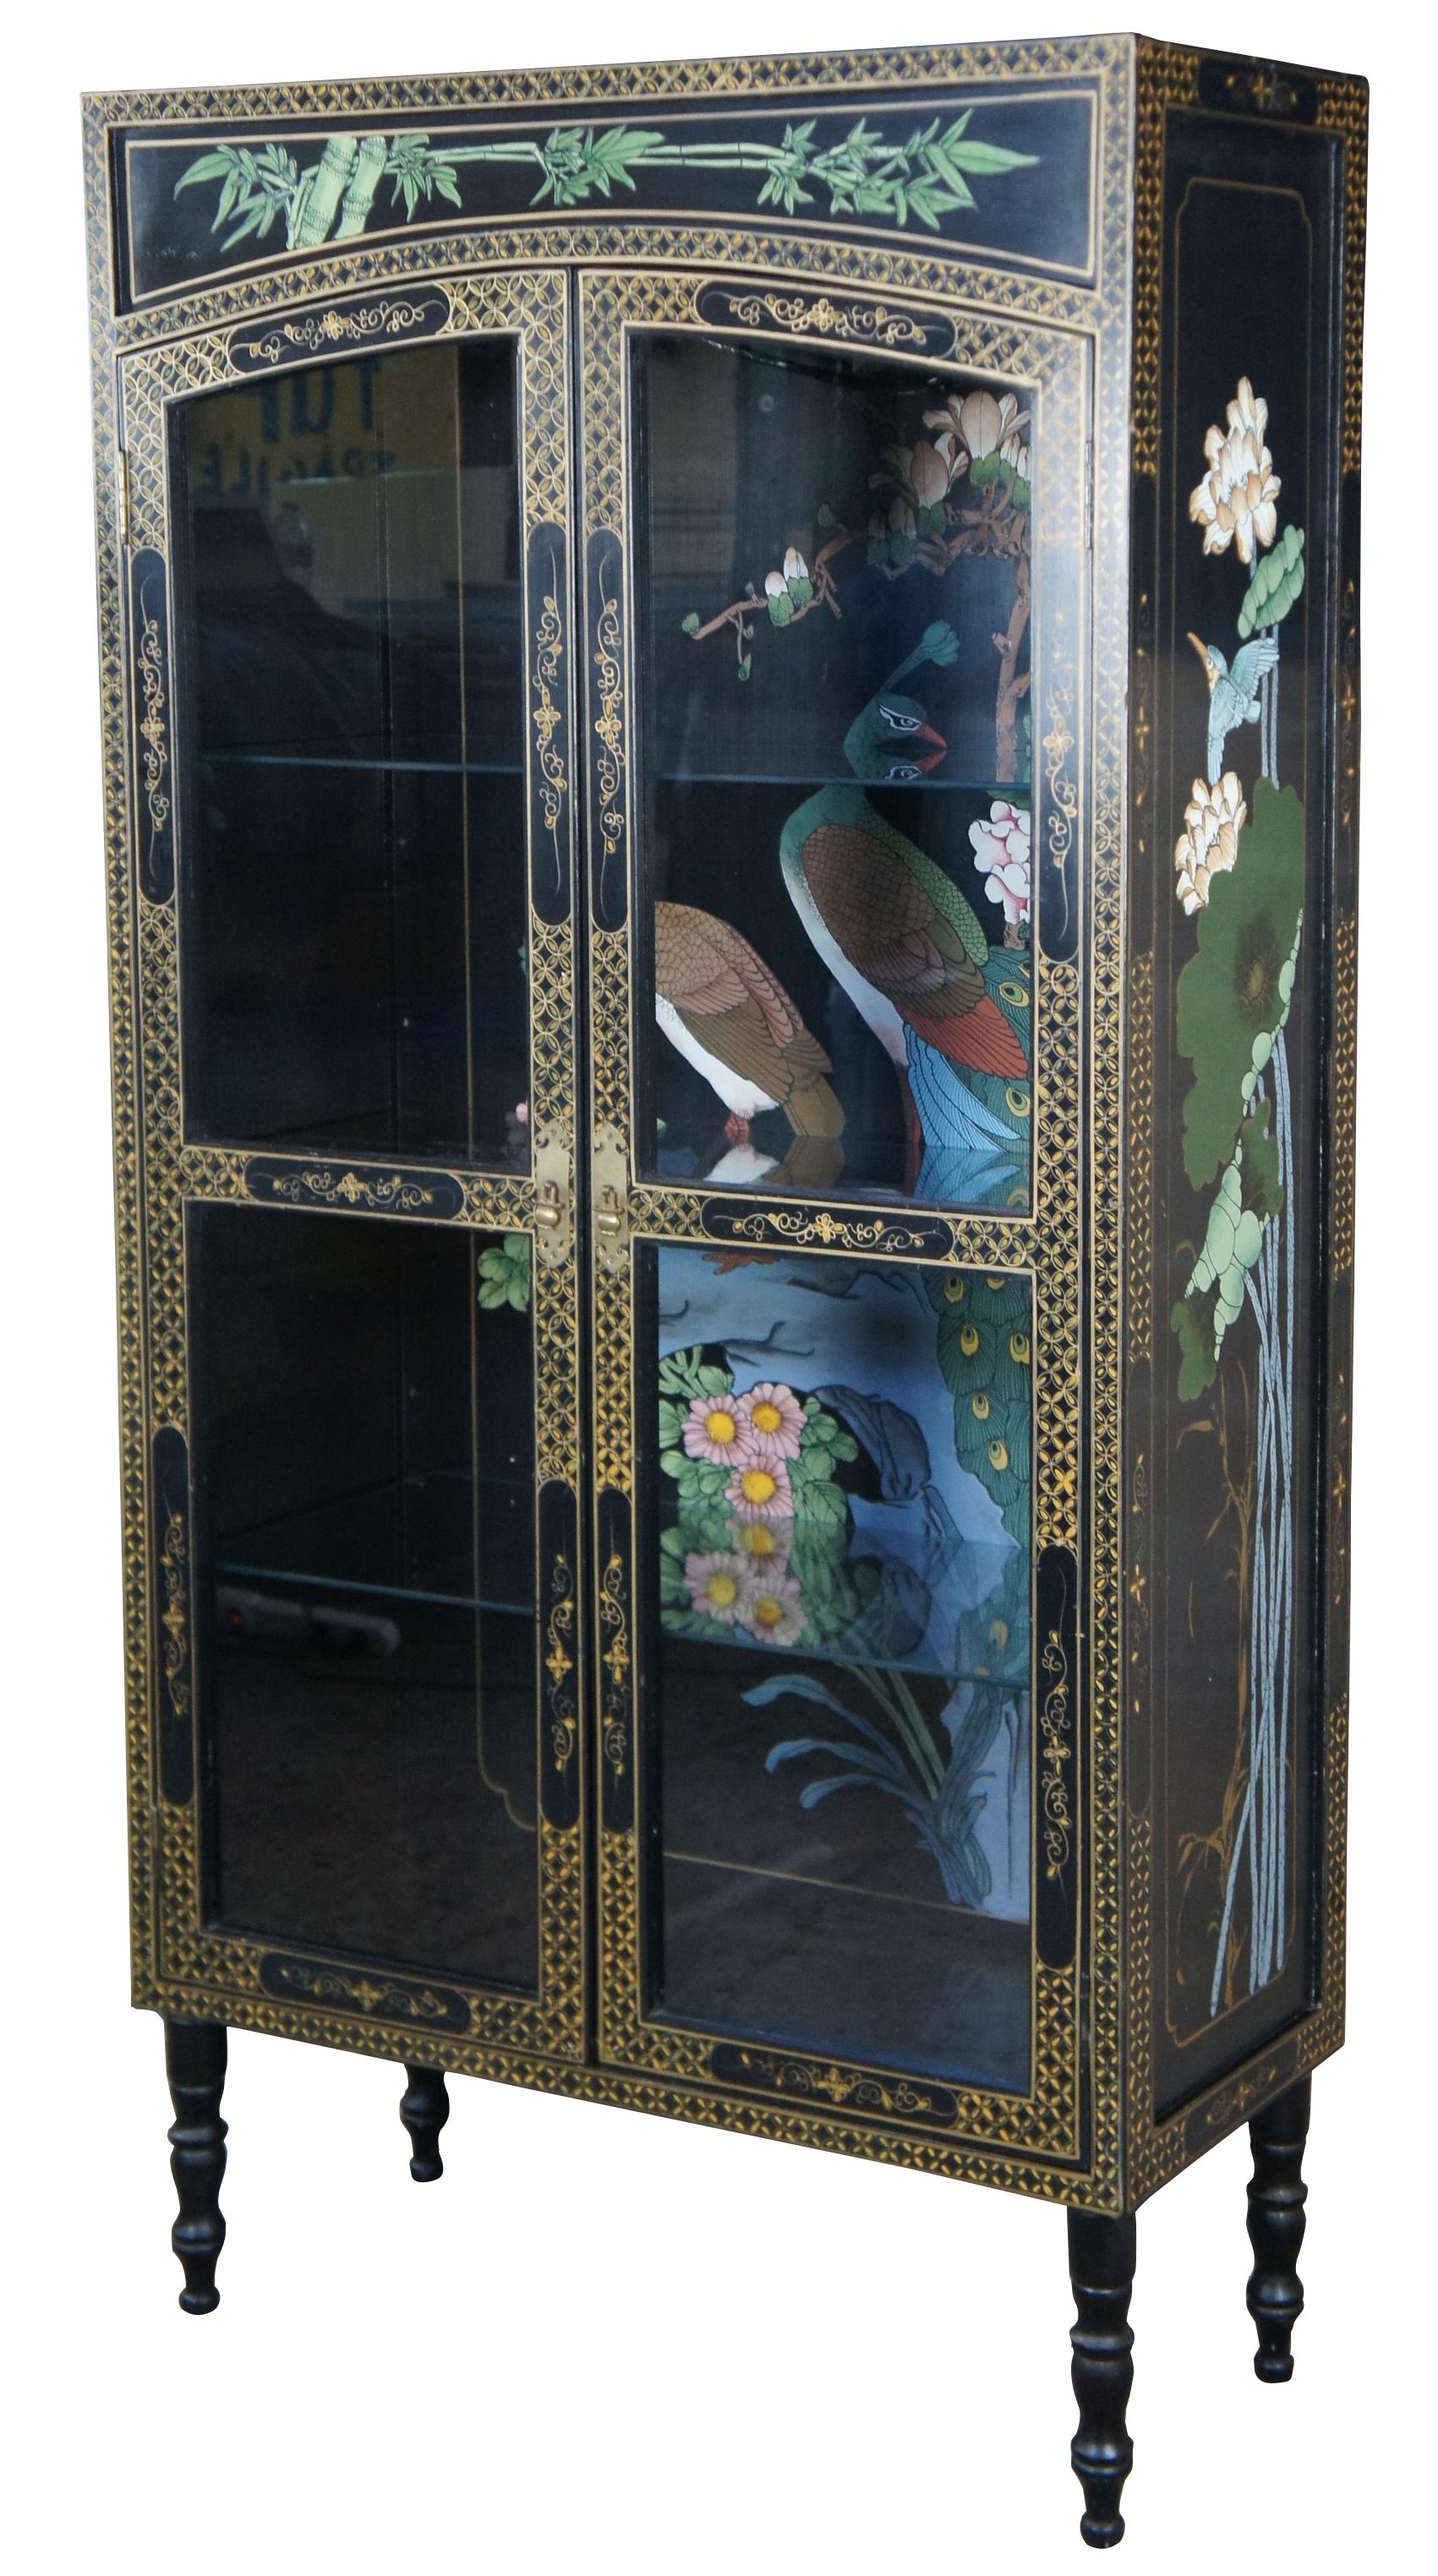 Mid century Oriental illuminating curio display cabinet featuring black lacquer finish with gold accents and two Peacocks nesting in a flowering tree with hummingbirds / birds. Measure: 63